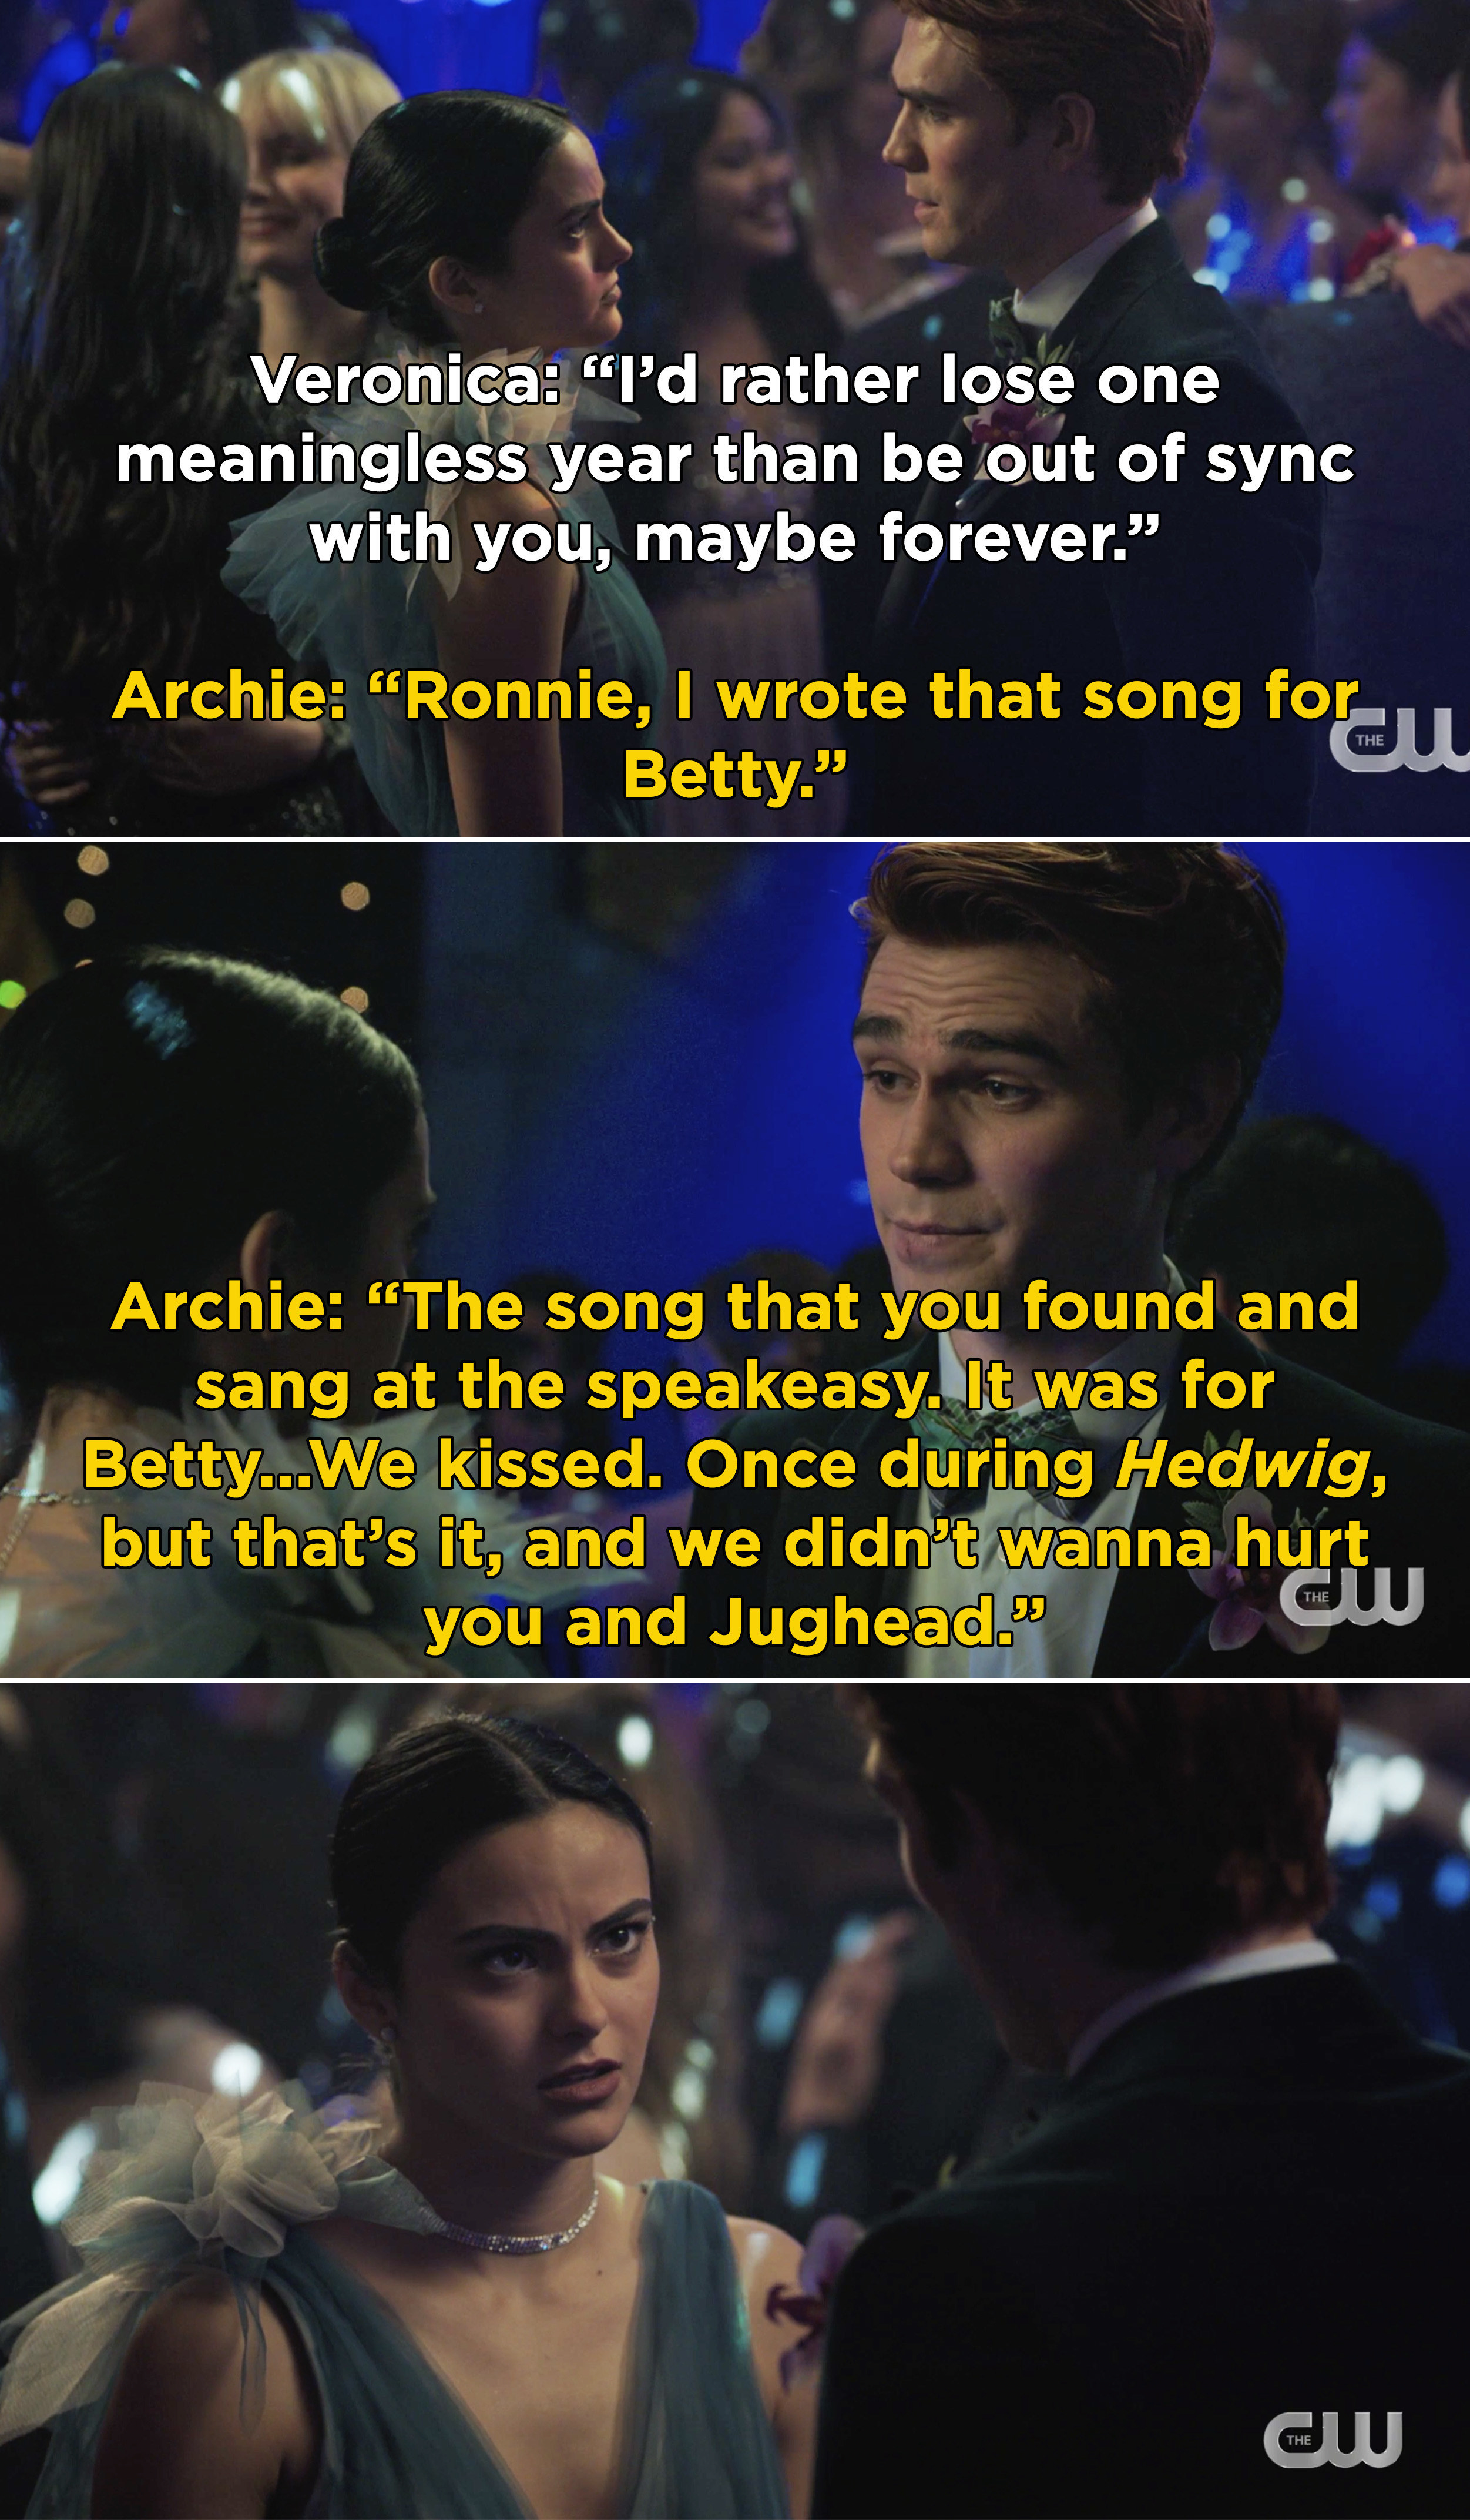 Archie tells Veronica he wrote the song for Betty and they kissed once but didn&#x27;t want to hurt her or Jughead